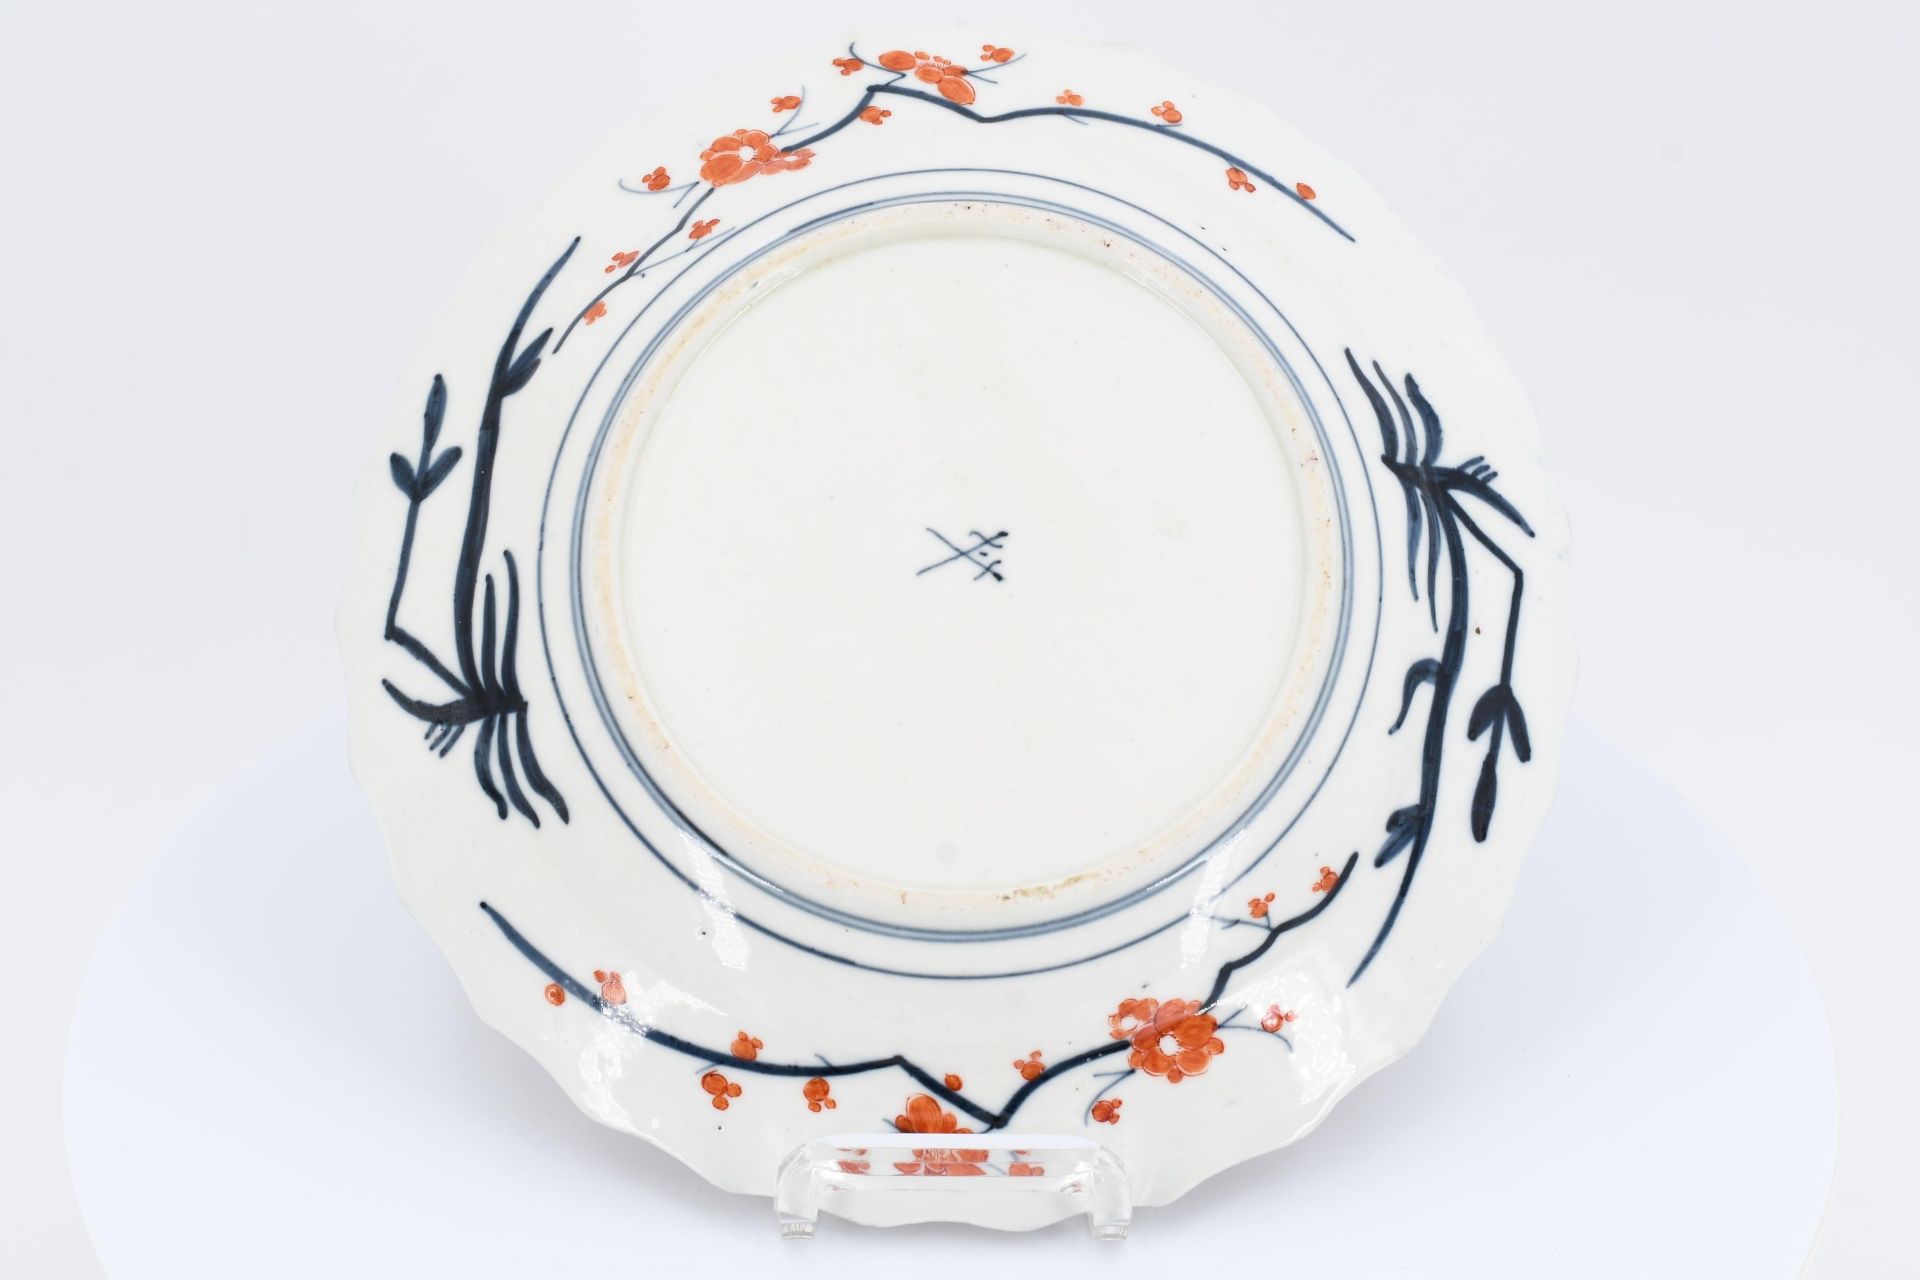 Porcelain plate with asian decor - Image 3 of 3